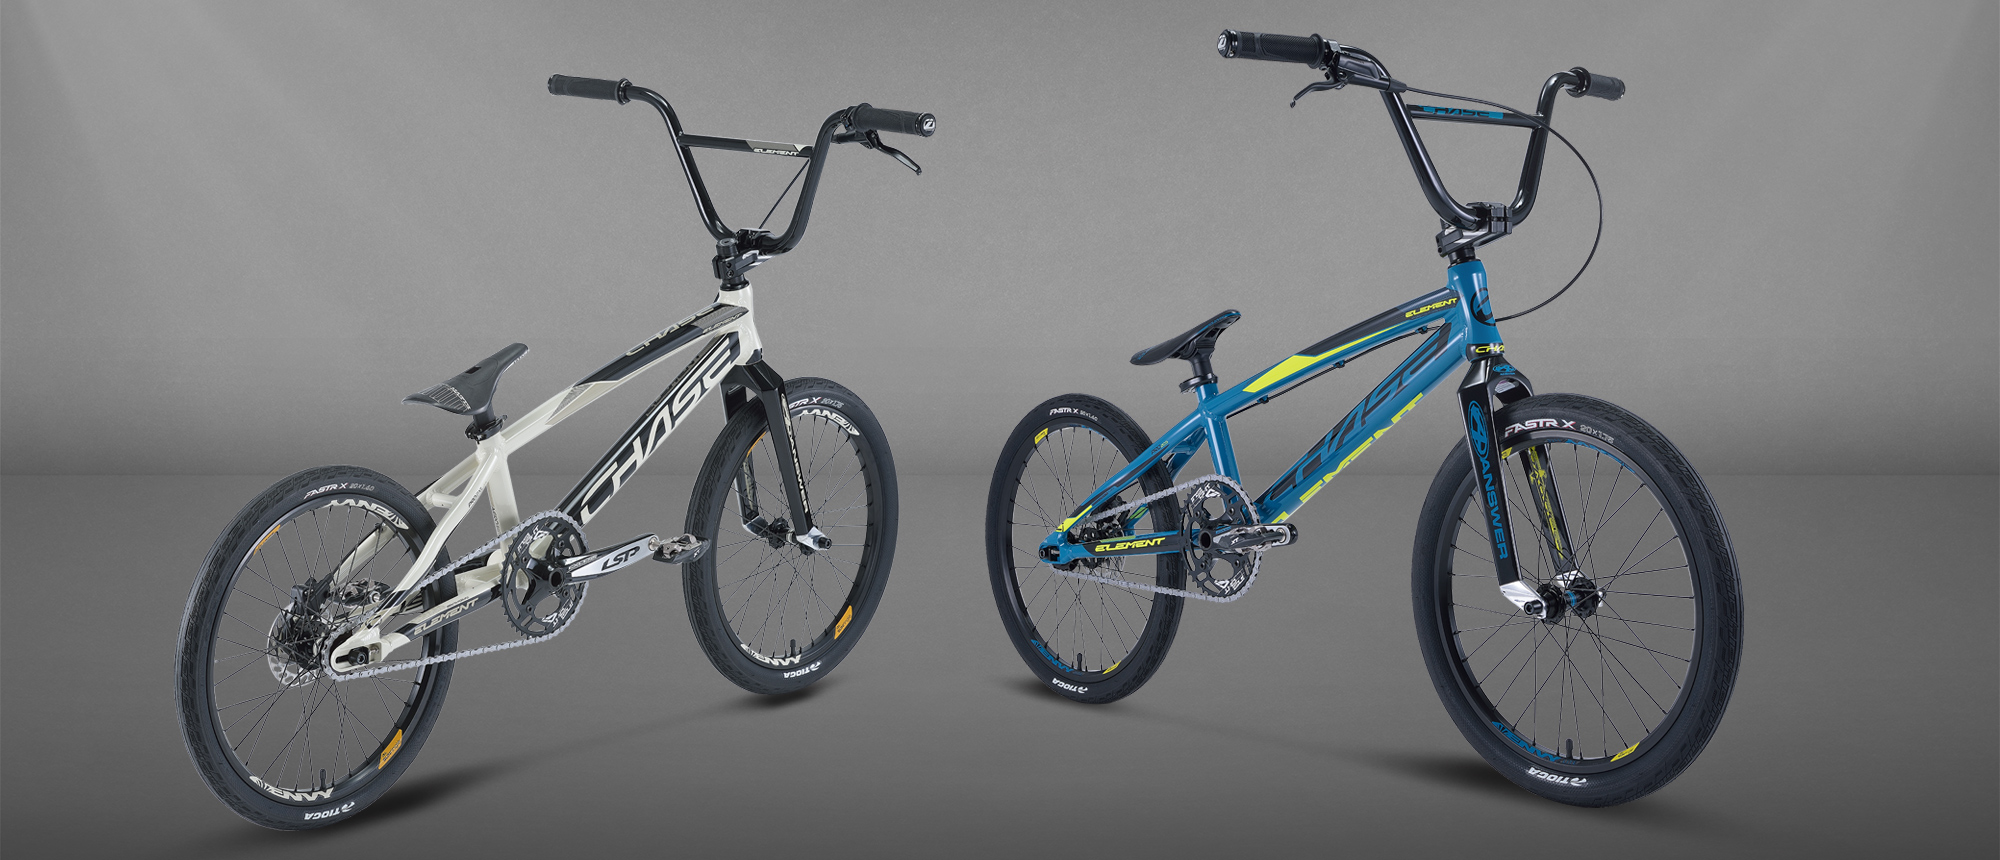 CHASE Bicycles - BMX Racing frames and complete bikes - CHASE BICYCLES